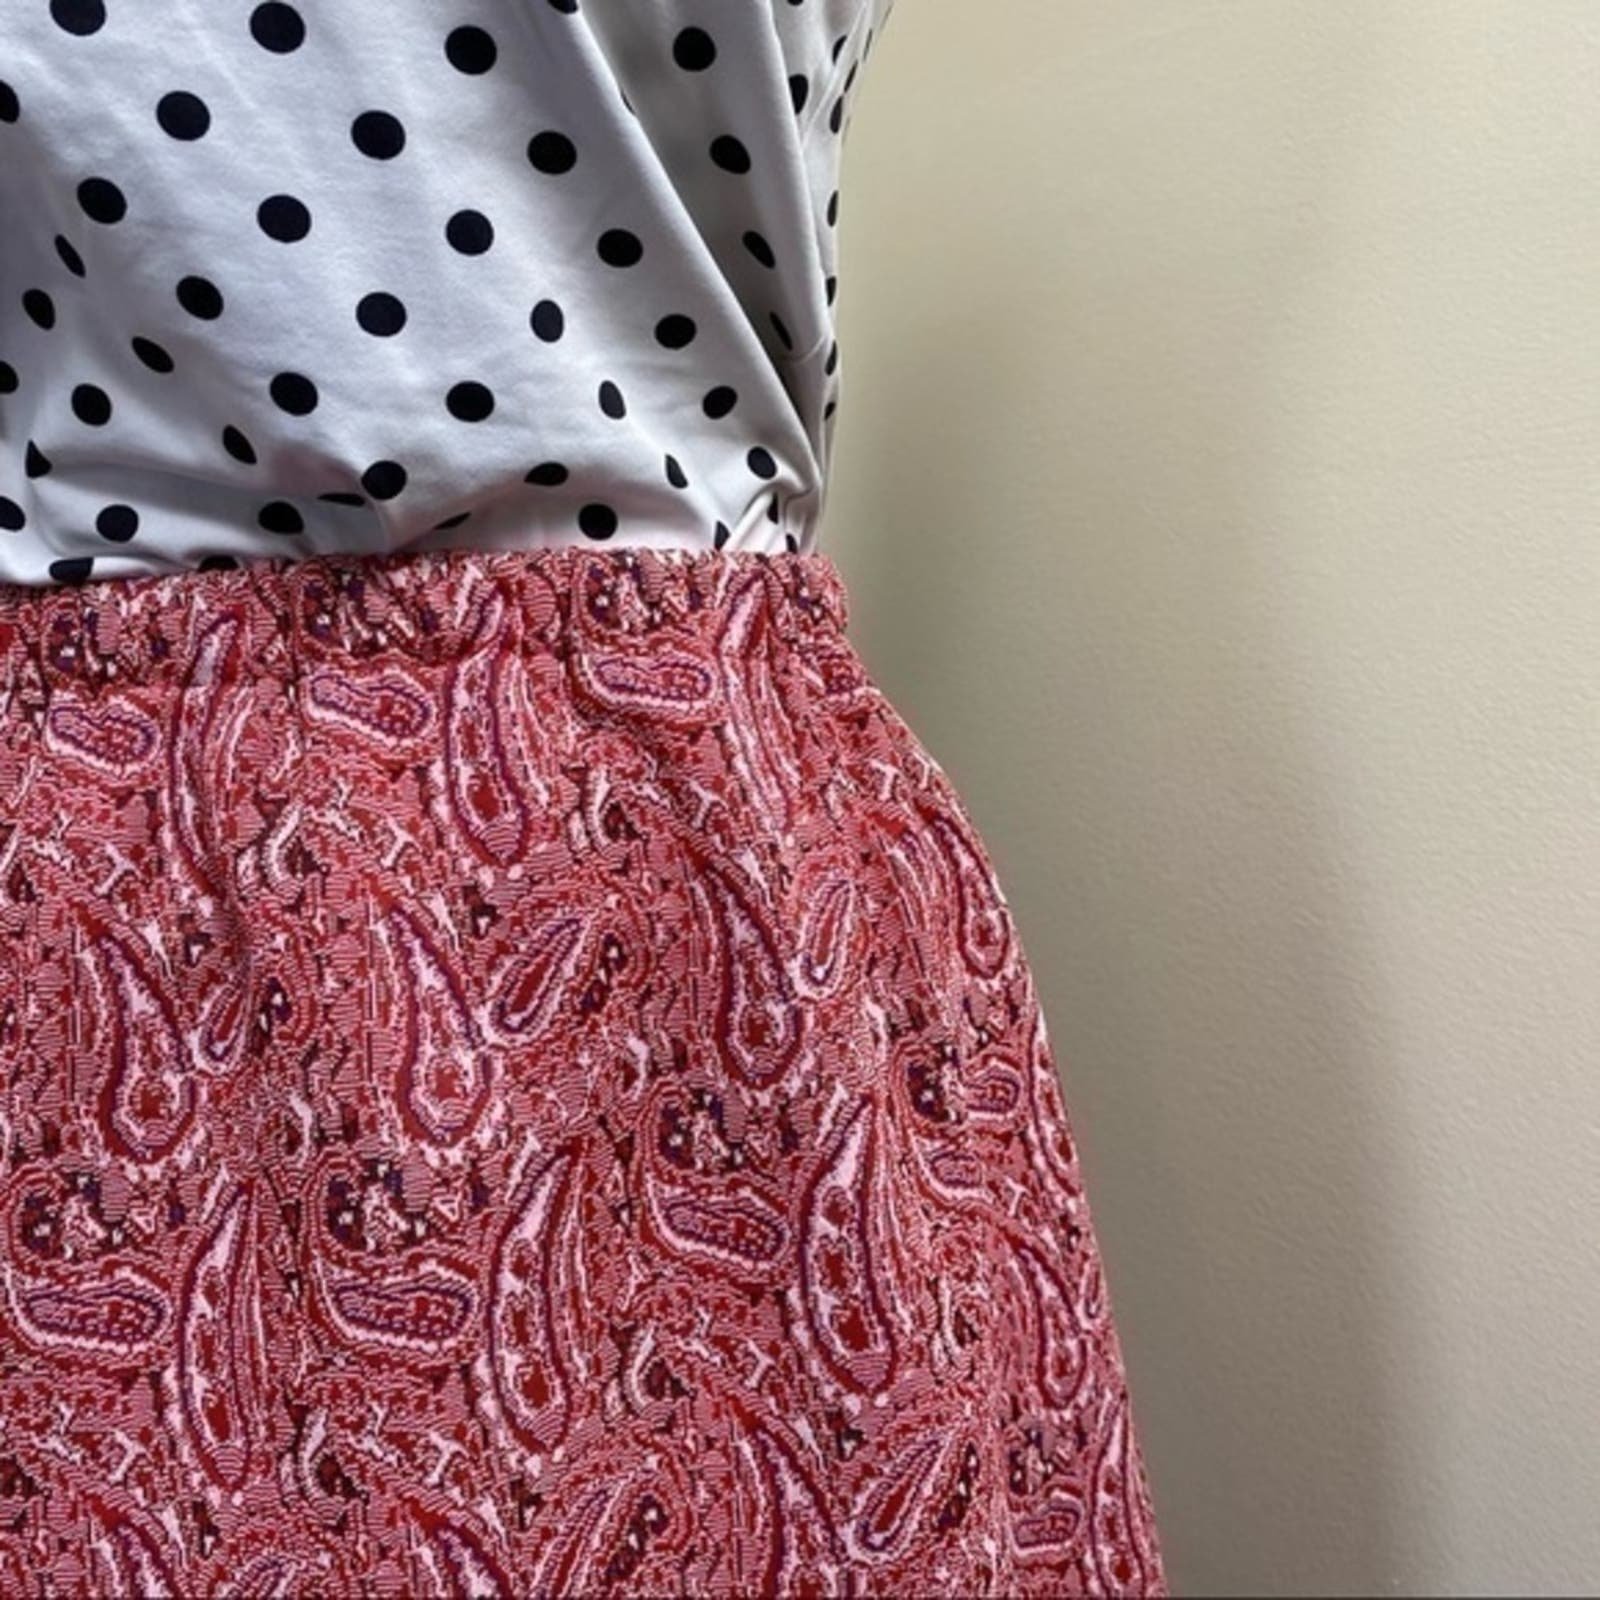 Authentic Handmade 60s paisley skirt. Small medium. Large. GrNMwXznG best sale